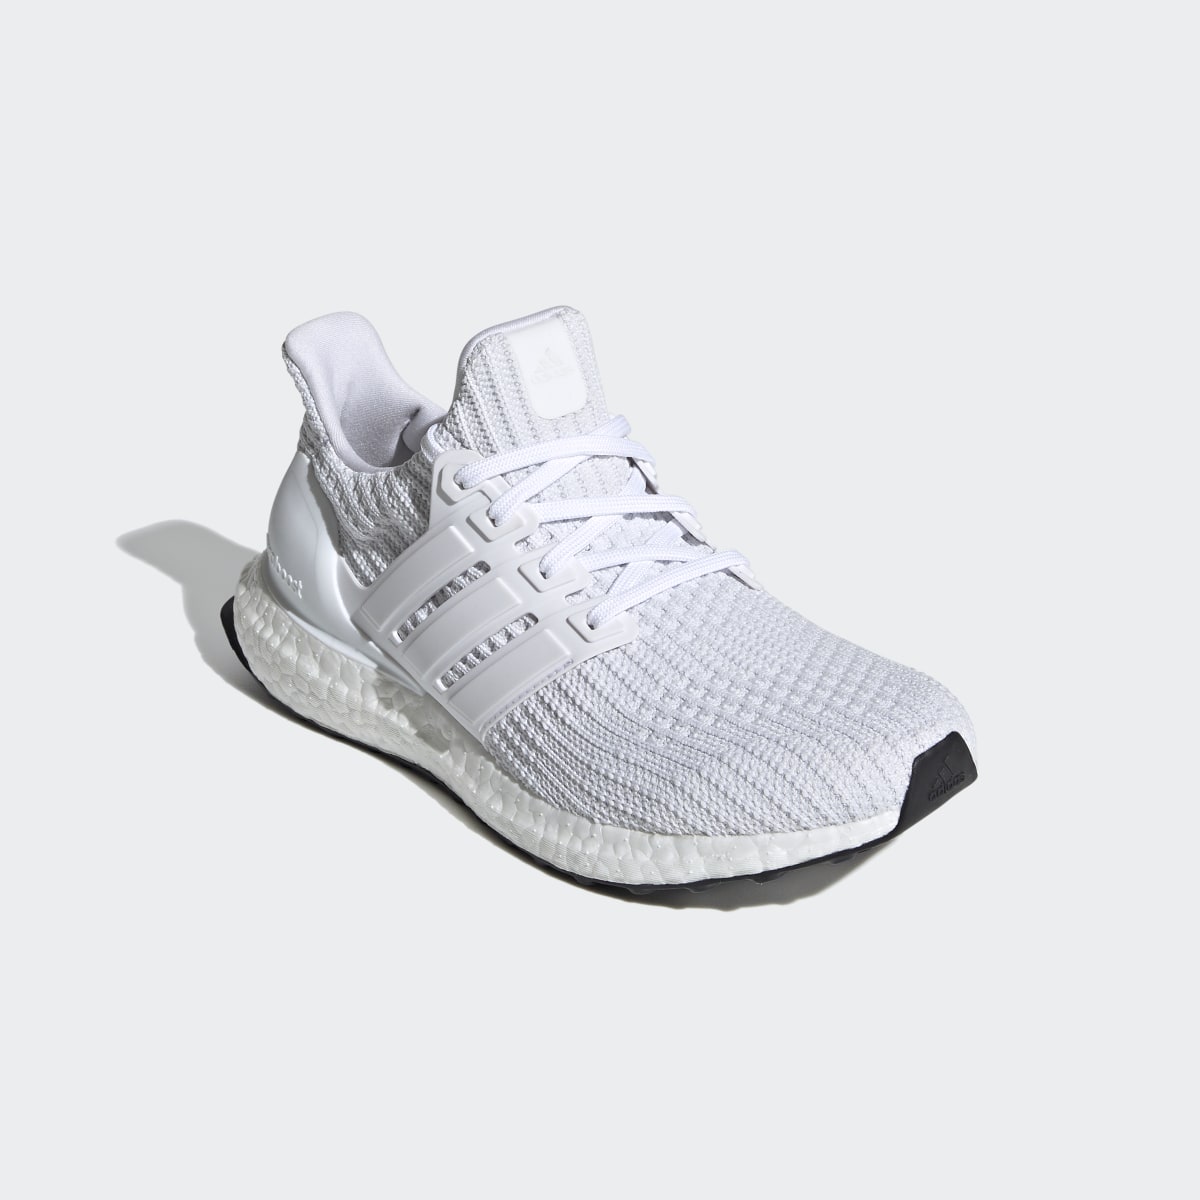 Adidas Ultraboost 4.0 DNA Shoes. 6